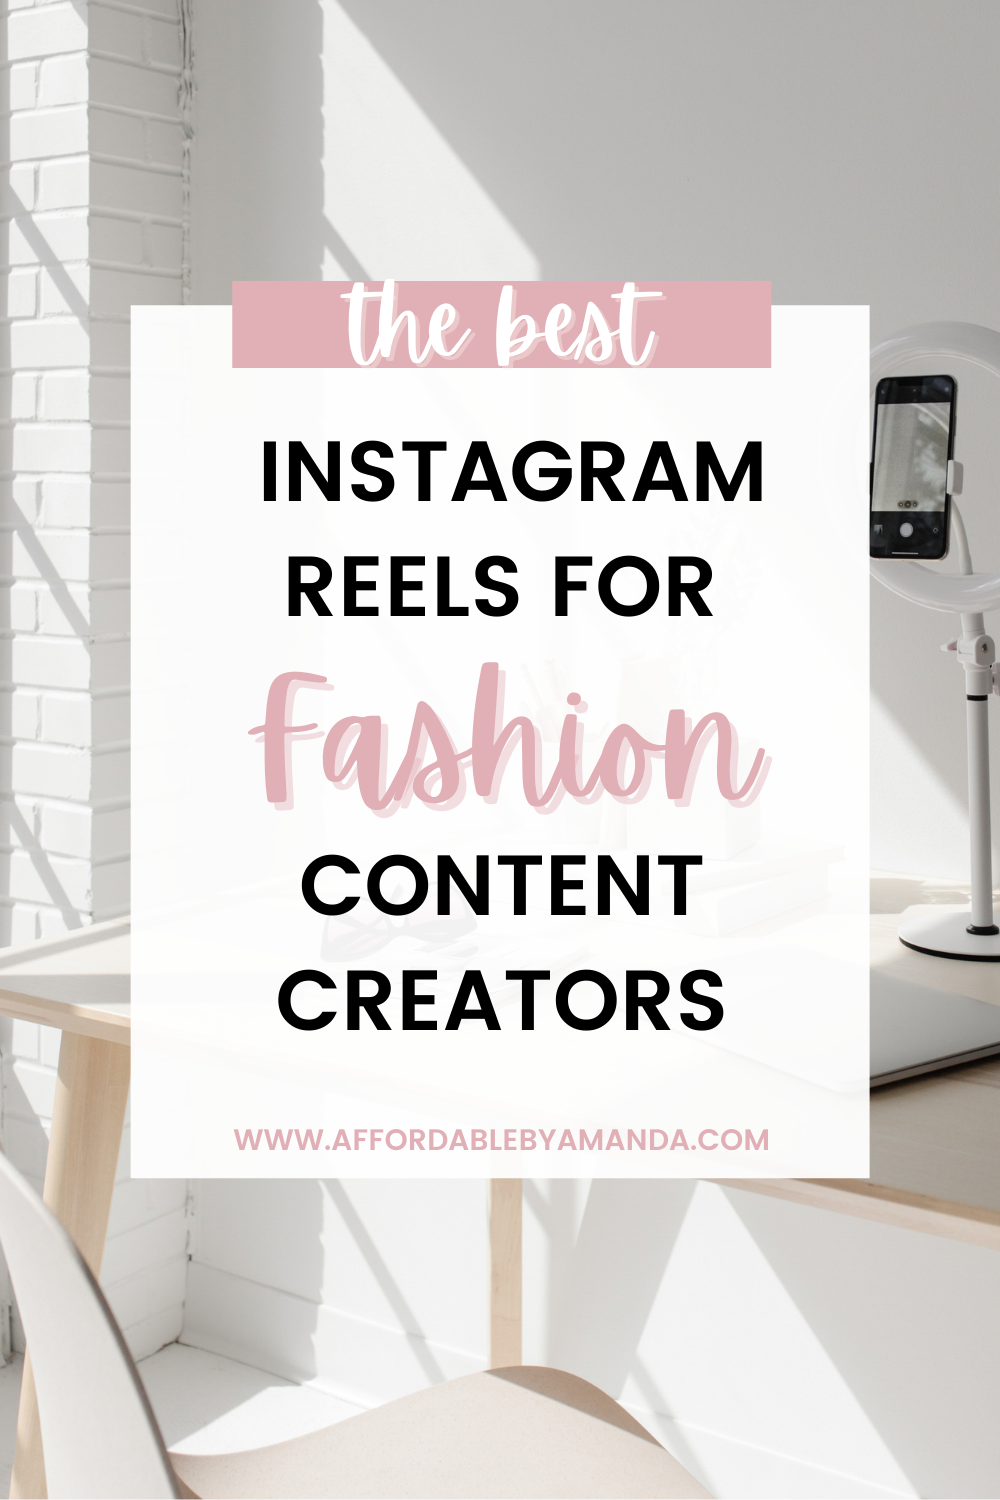 The Best Instagram Reels for Fashion Content Creators. Instagram Reels Ideas 2022. 8 Instagram Reels Ideas to Post Today.